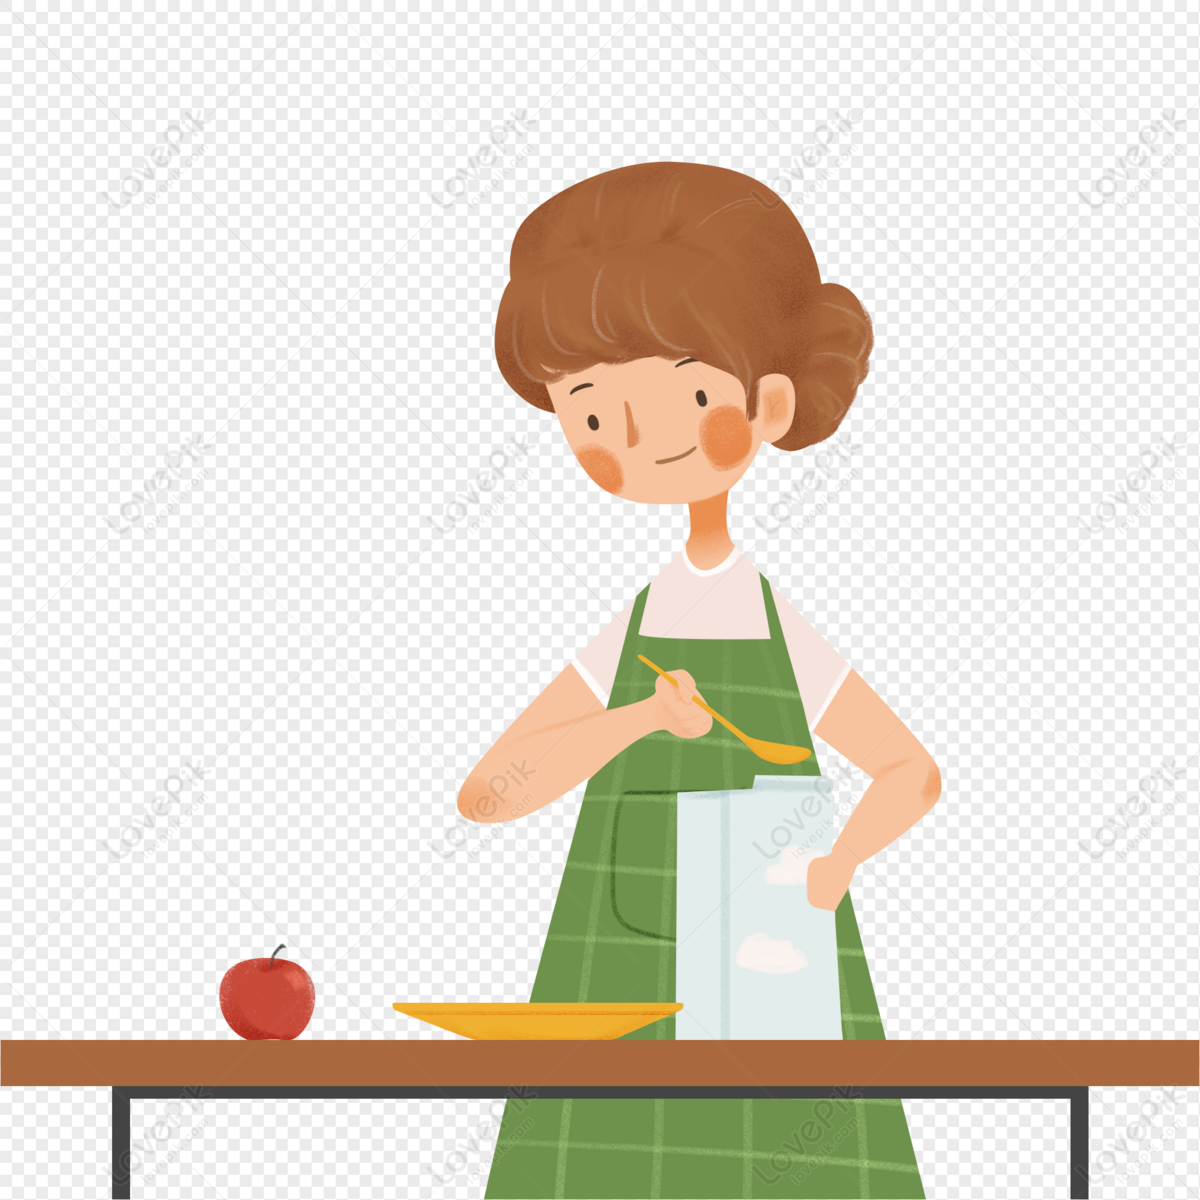 Hand Drawn Cartoon Cooking Characters PNG Hd Transparent Image And Clipart  Image For Free Download - Lovepik | 401590154